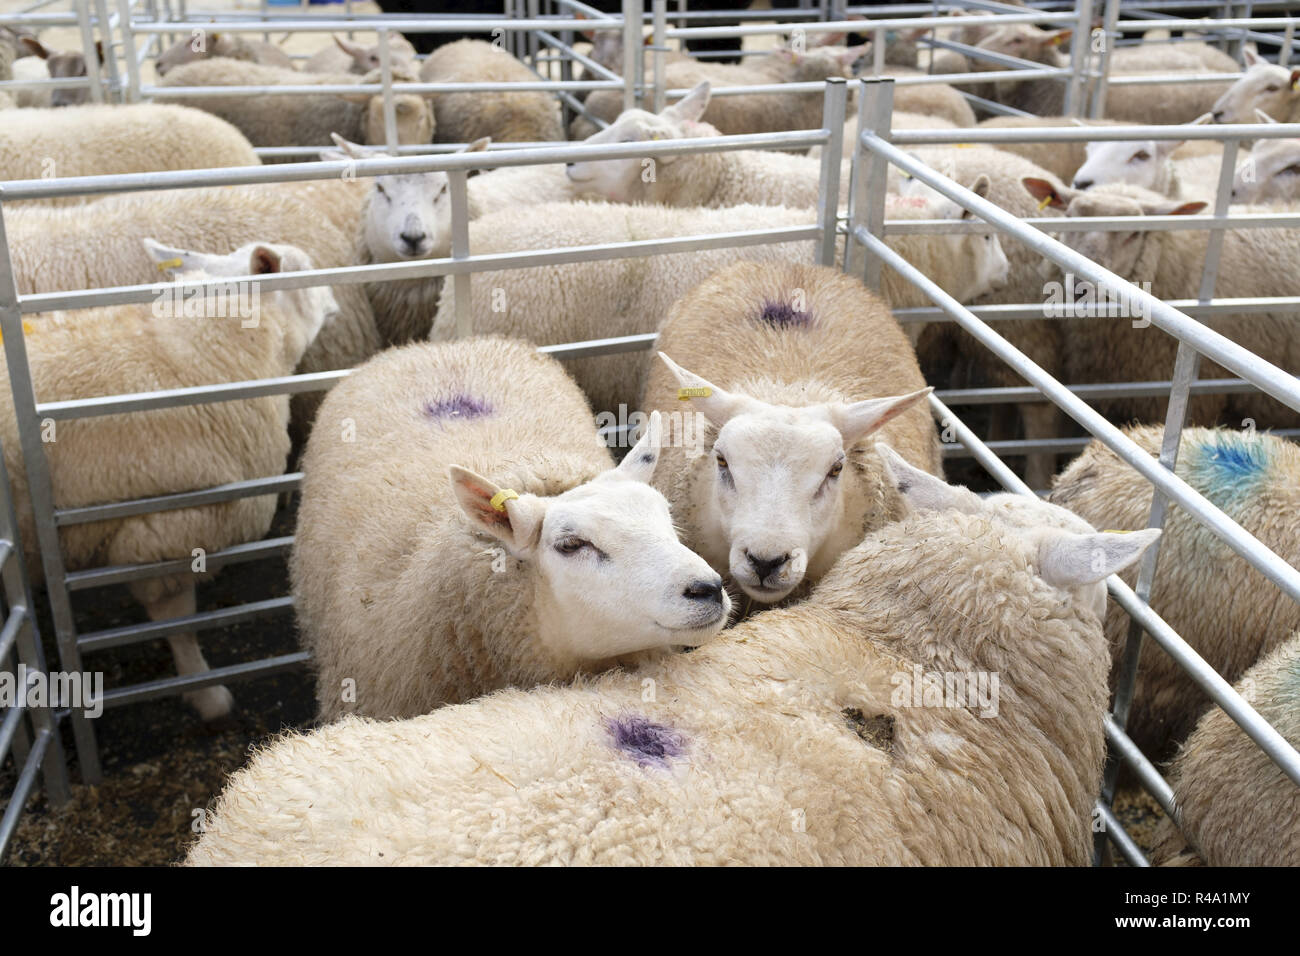 Winslow, UK - November 26, 2018. Sheep are held in pens at the Winslow Primestock Show. The show is an annual event held in the historic market town in Buckinghamshire. Credit: Paul Maguire/Alamy Live News Stock Photo